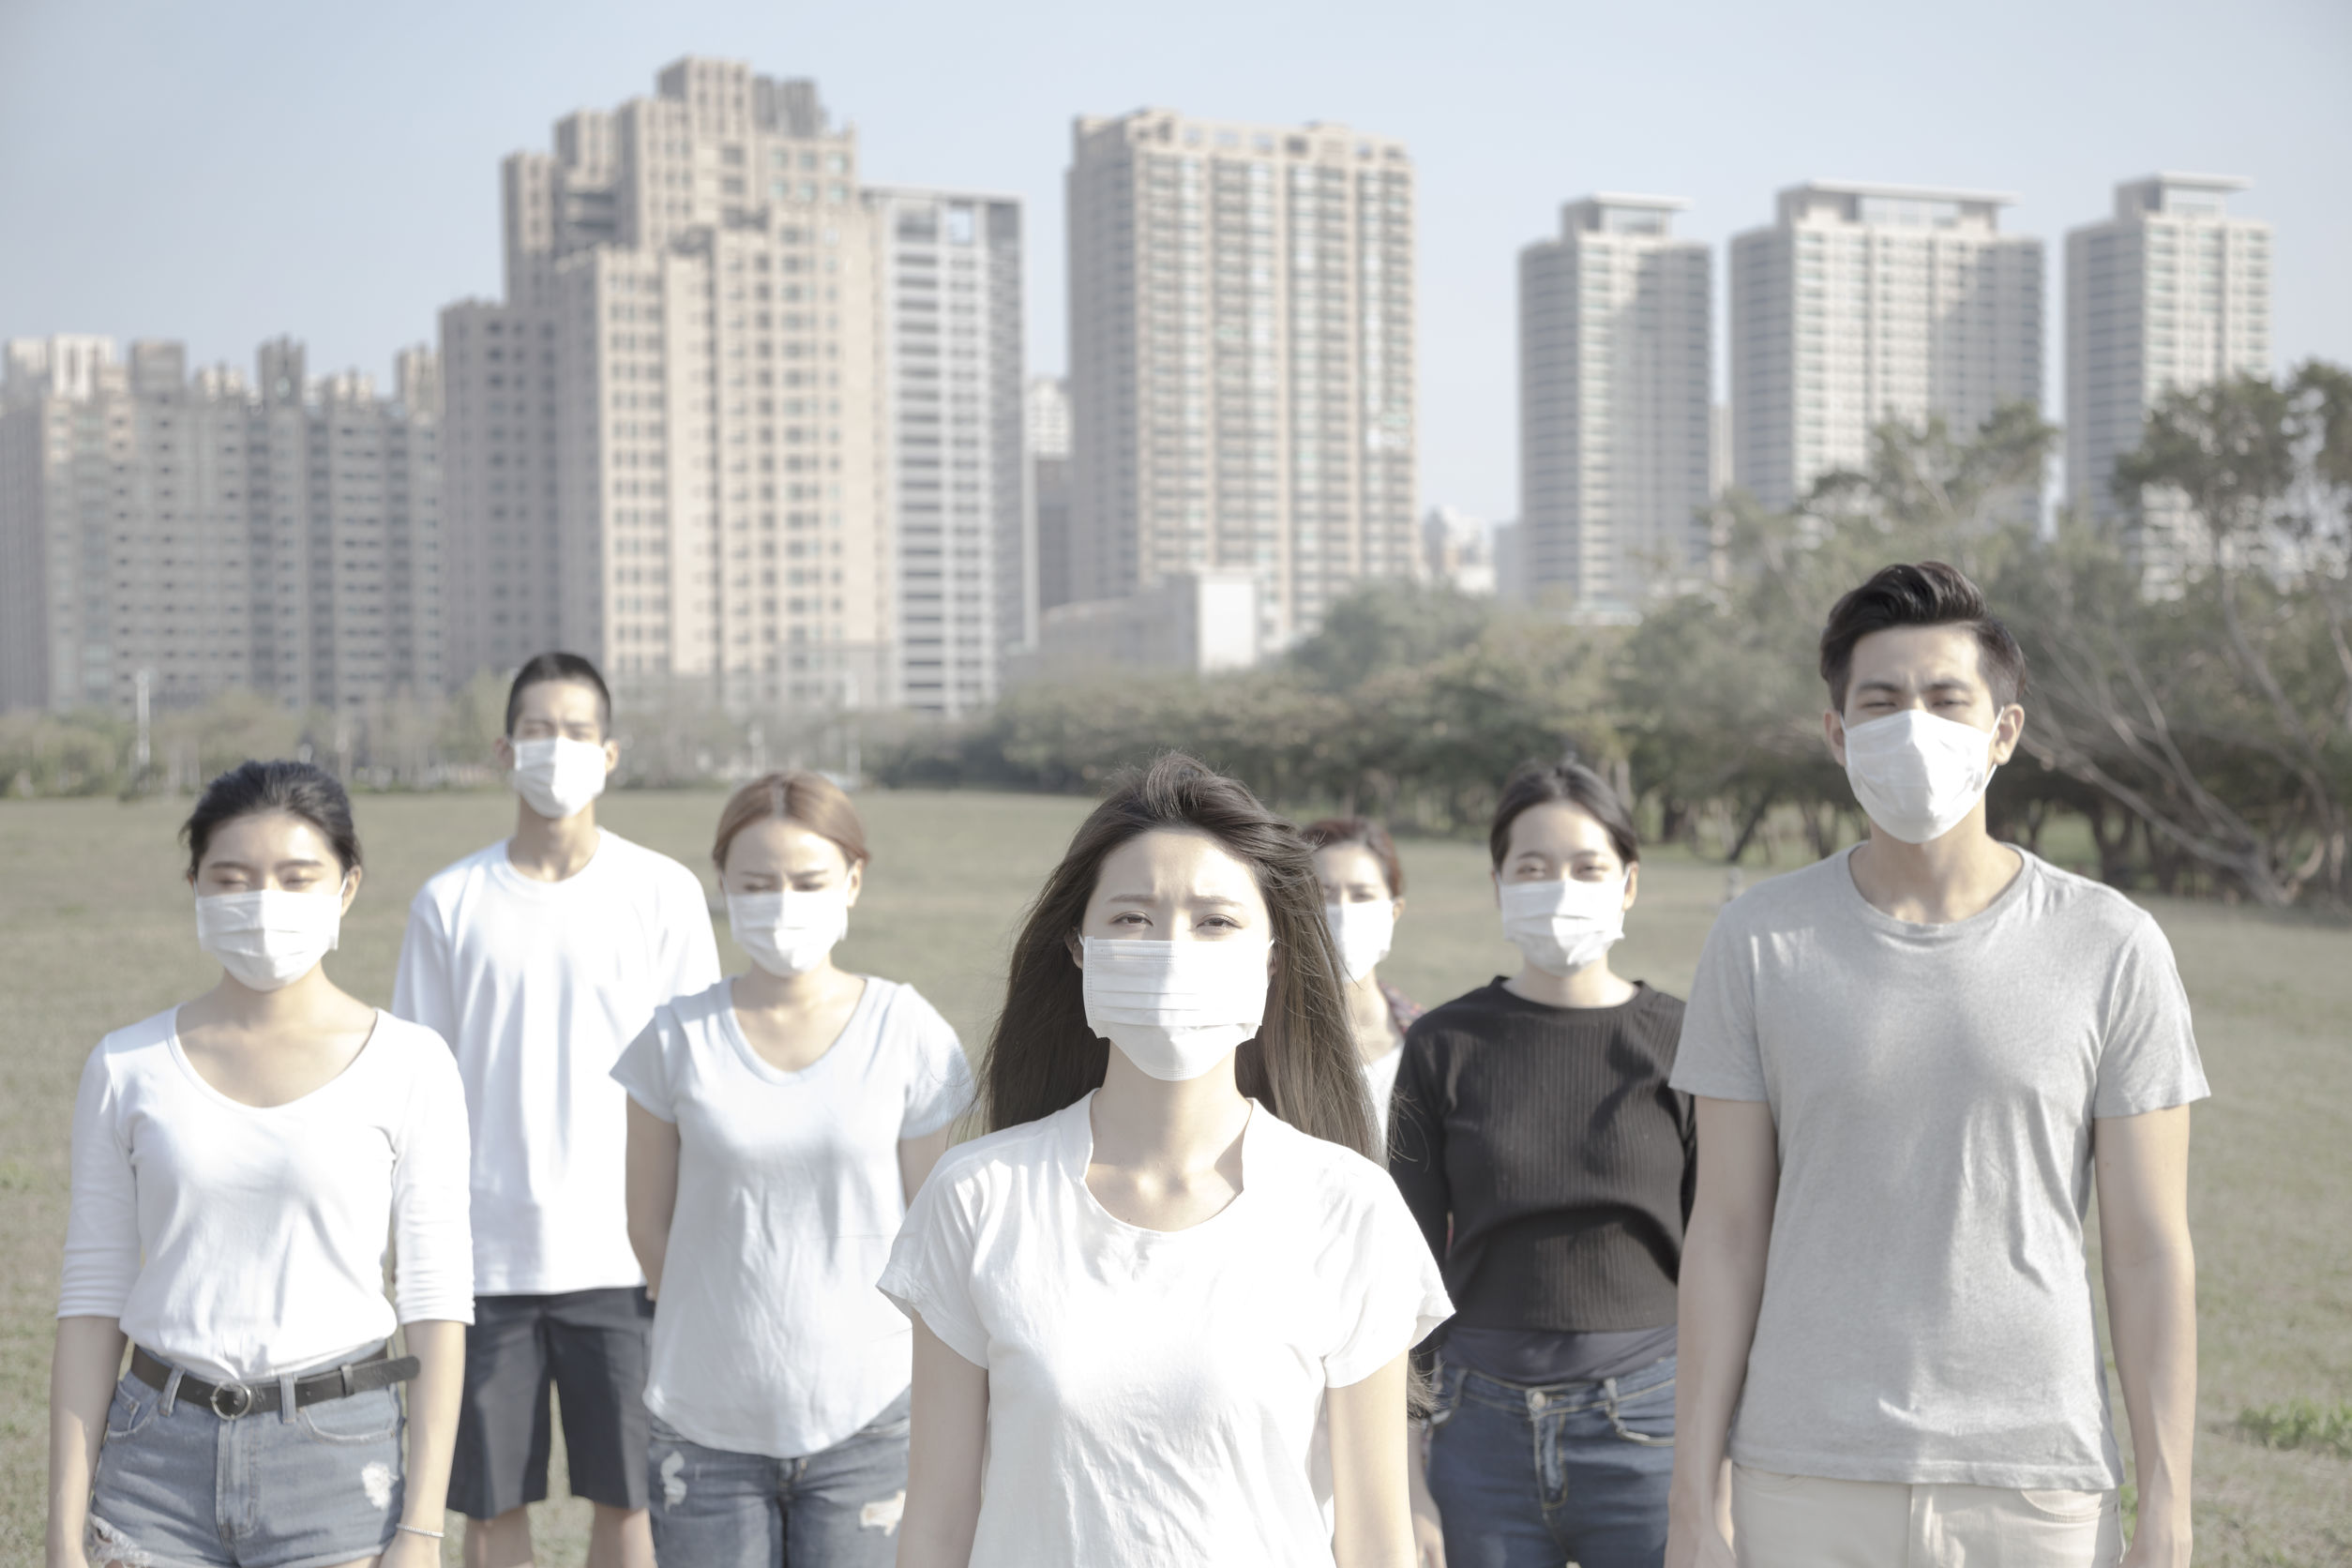 People wearing masks and standing in a park.